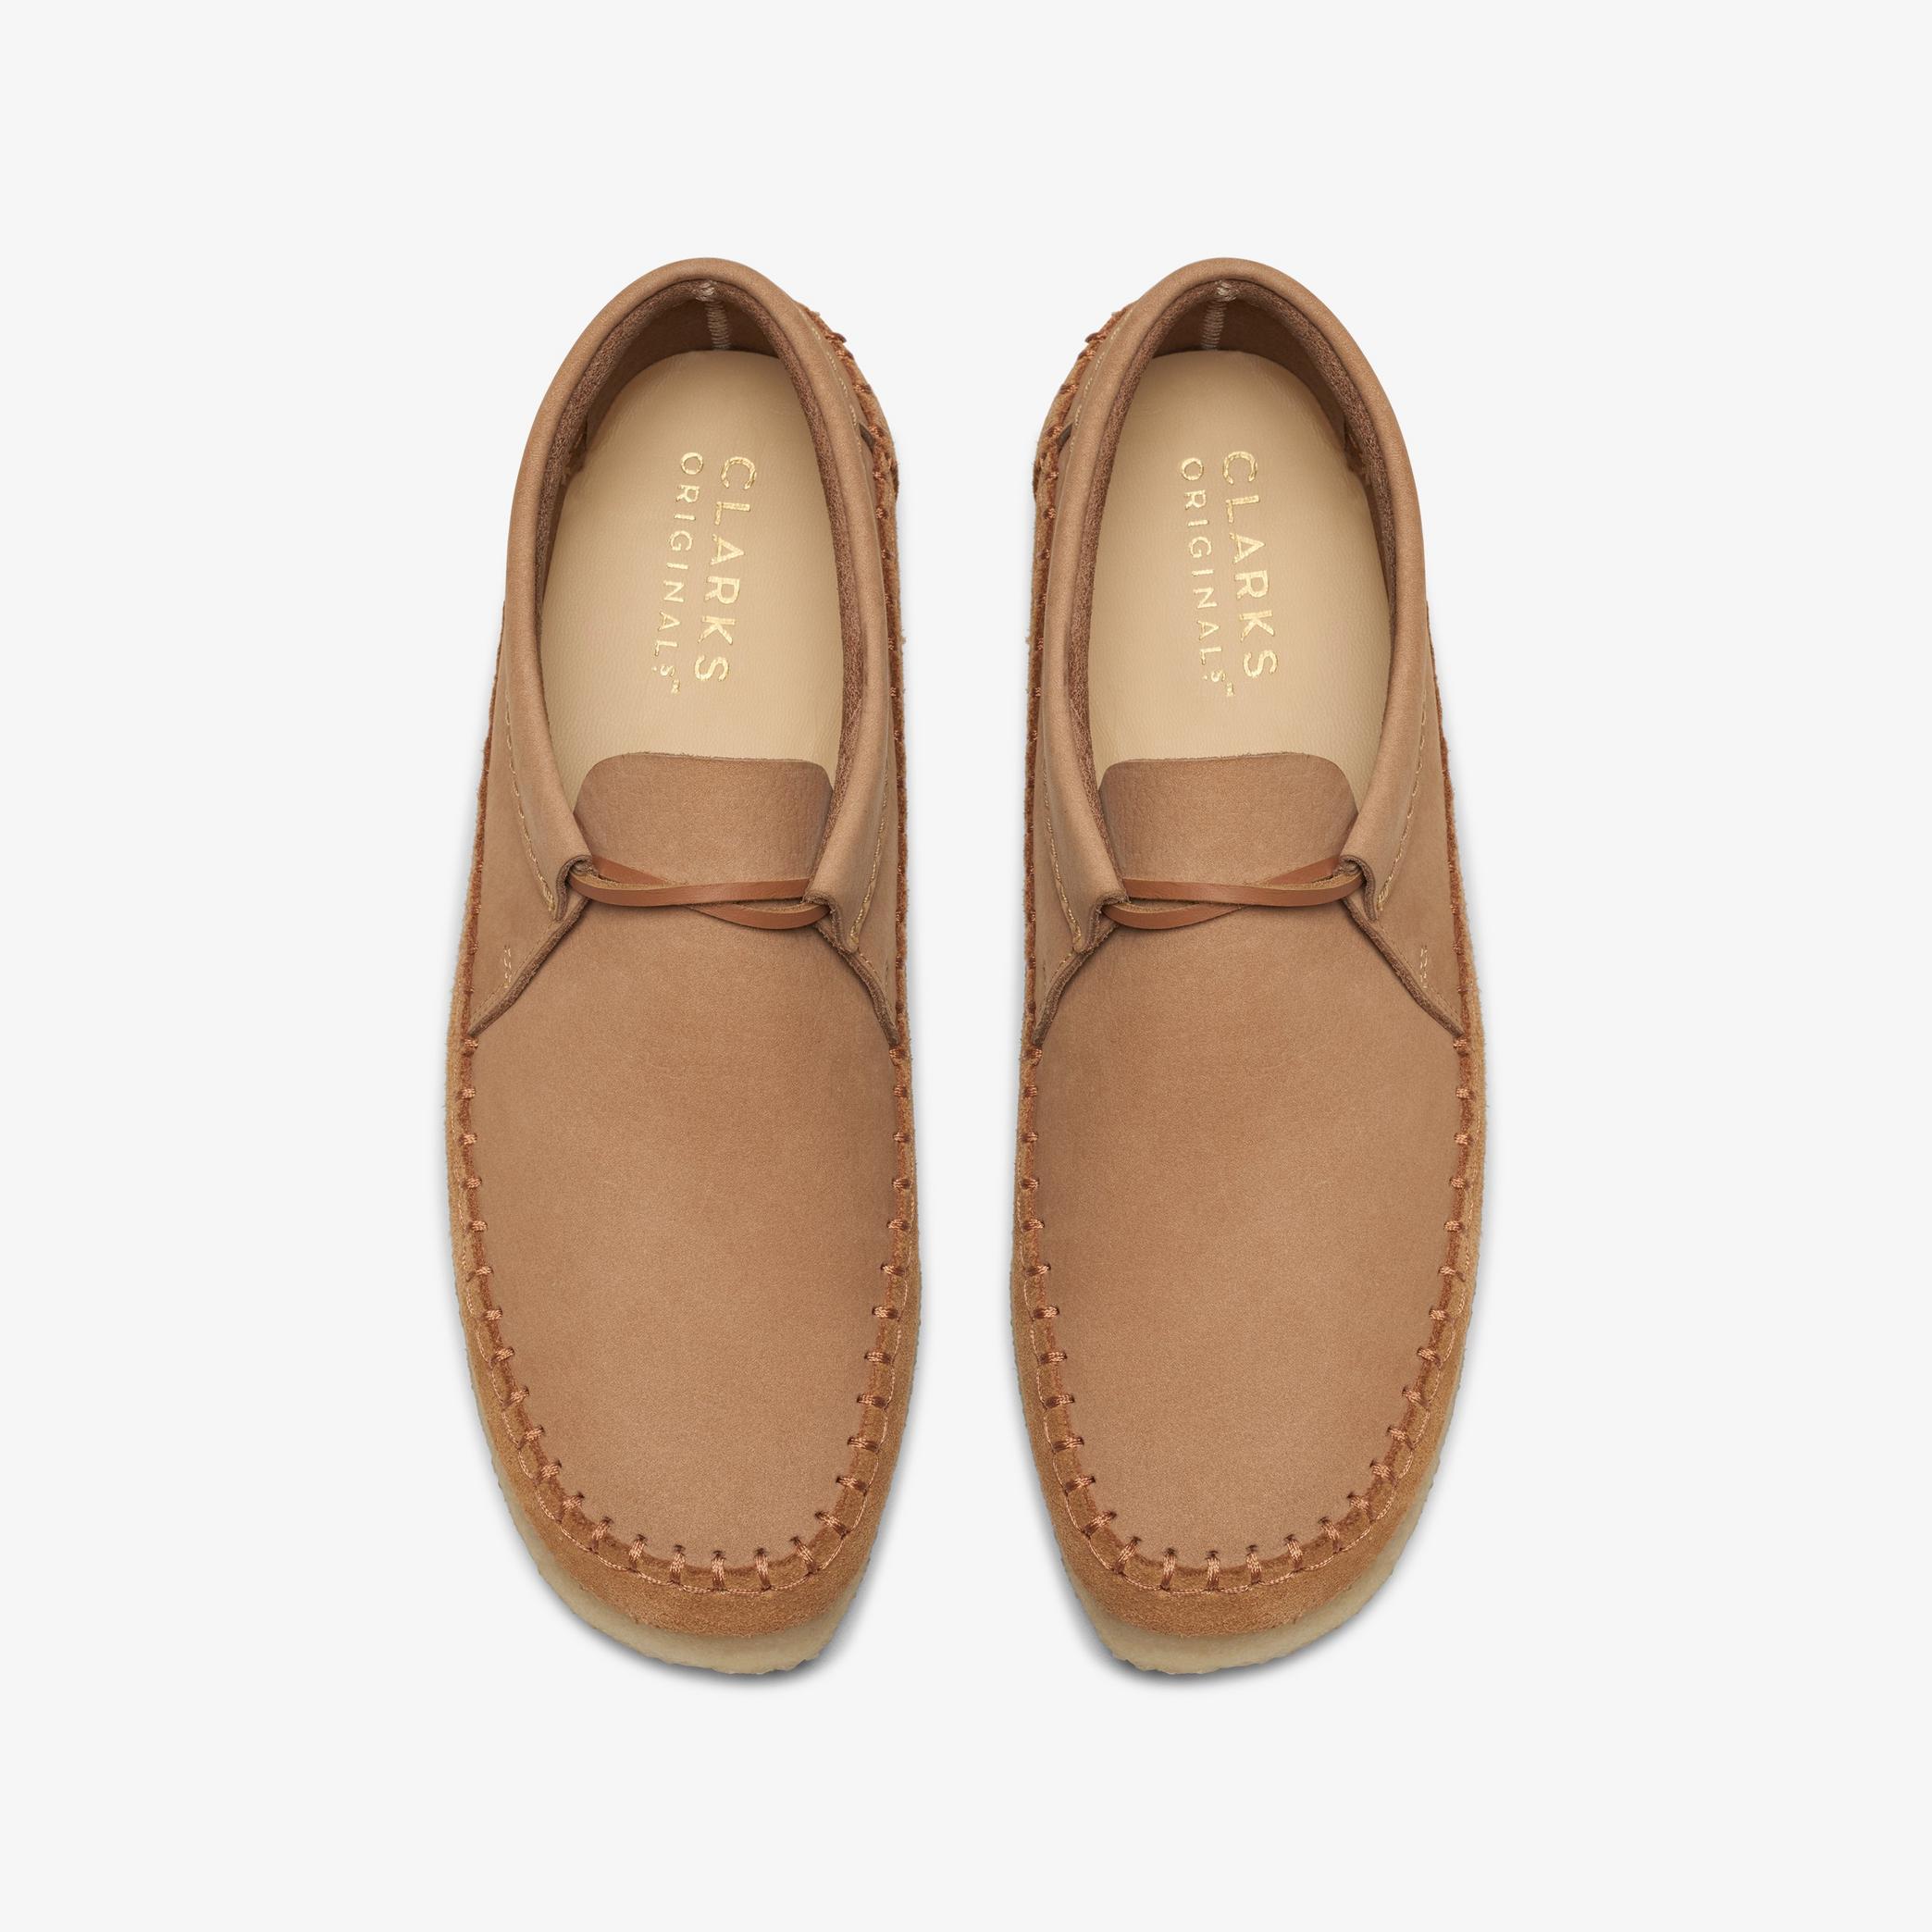 Weaver Tie Tan Suede Moccasins, view 6 of 6